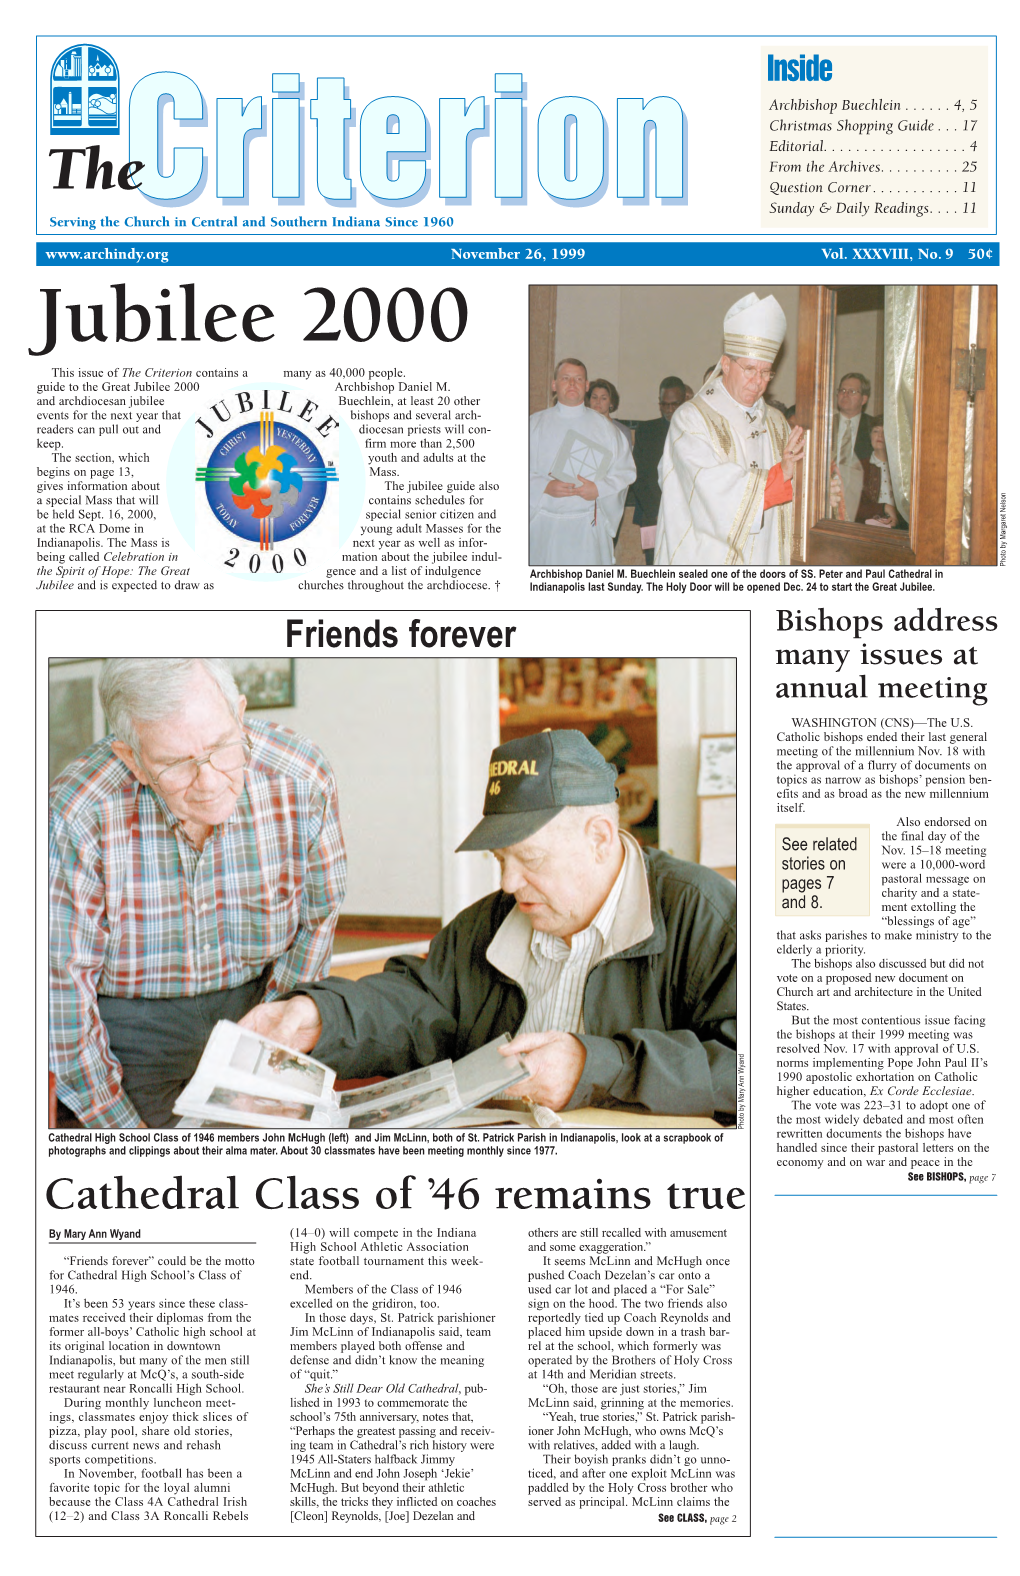 Jubilee 2000 This Issue of the Criterion Contains a Many As 40,000 People